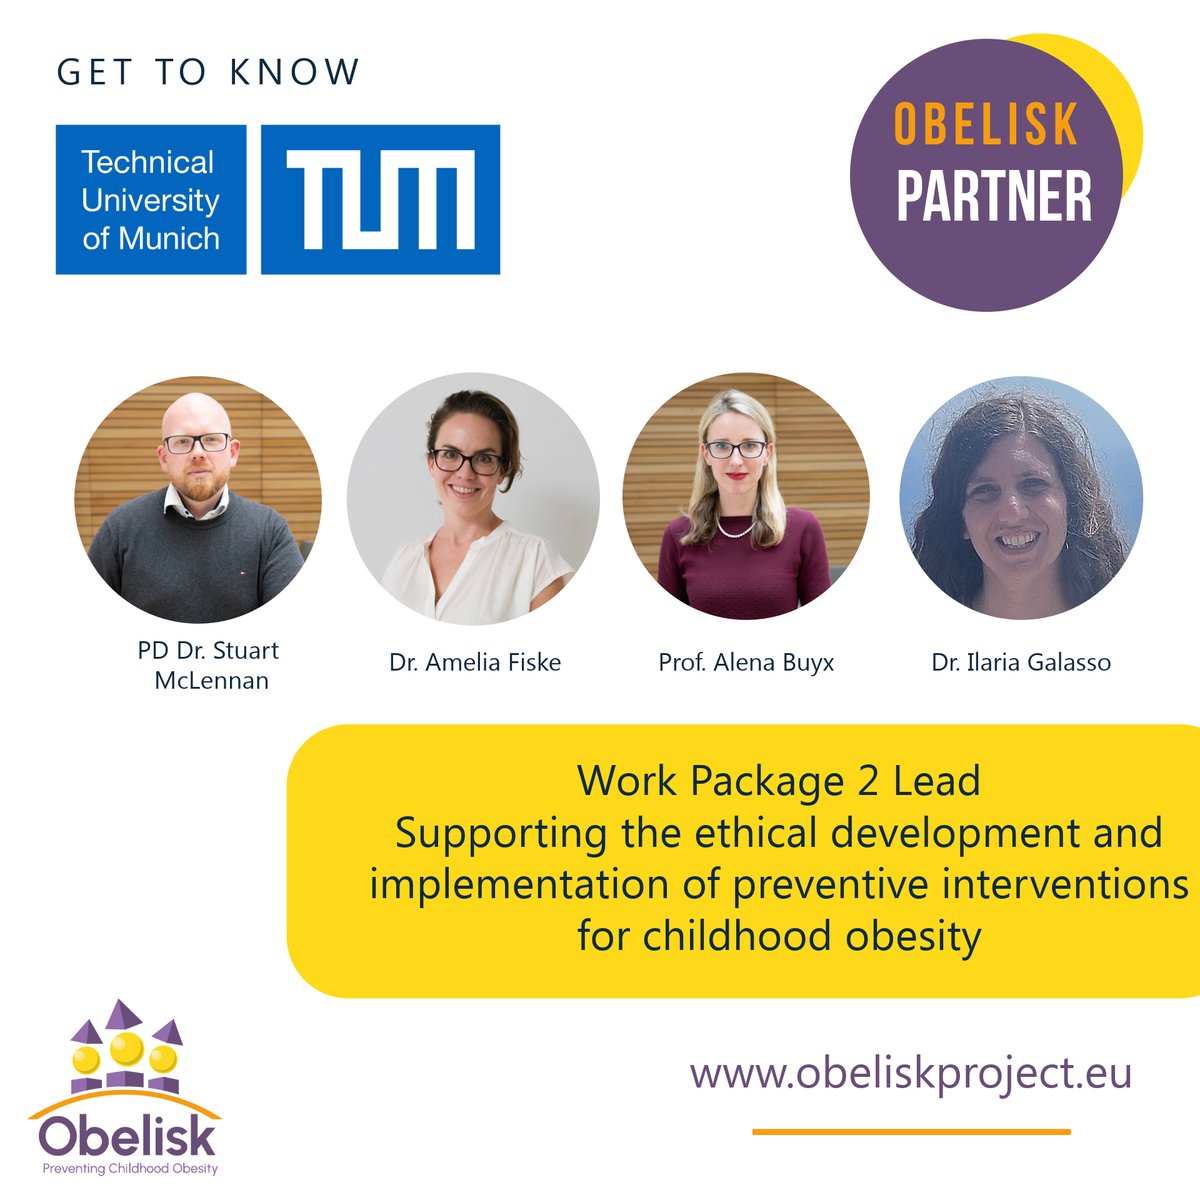 Introducing our partner @TU_Muenchen who lead WP2 which will focus on Legal and Social Implications (ELSI) & Policies and ELSI of predictive models for intervening on #ChildhoodObesity More here: obeliskproject.eu/partners/techn… #Kindheitsfettleibigkeit #obesidadinfantil